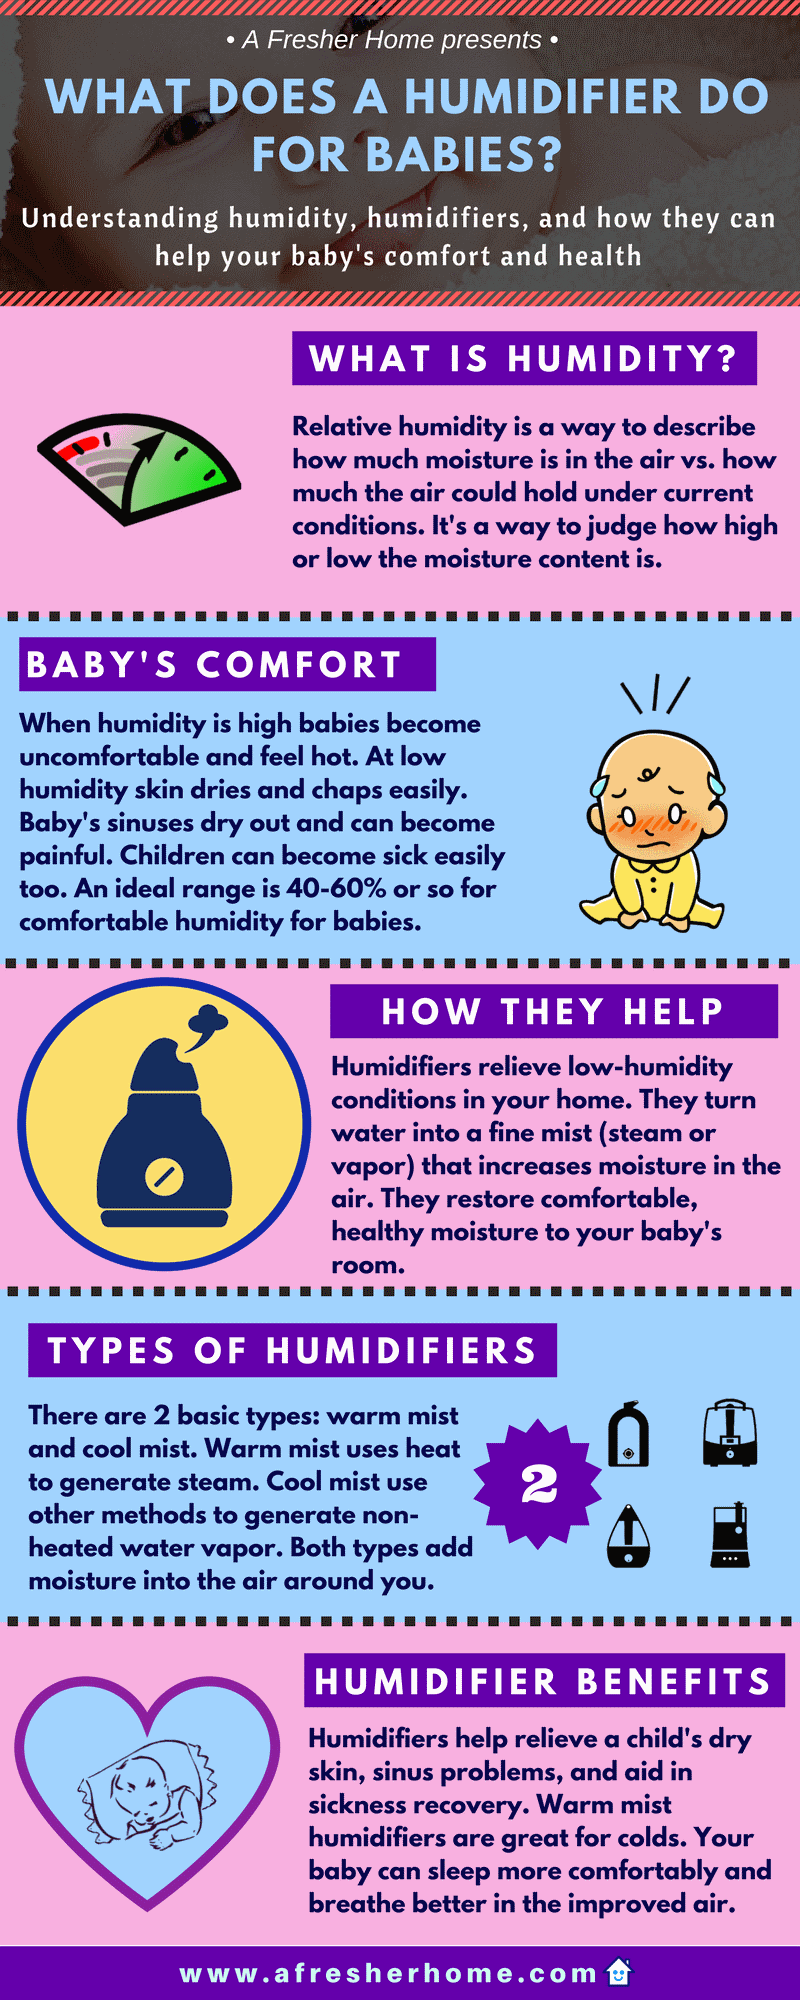 What does a humidifier do for babies infographic image